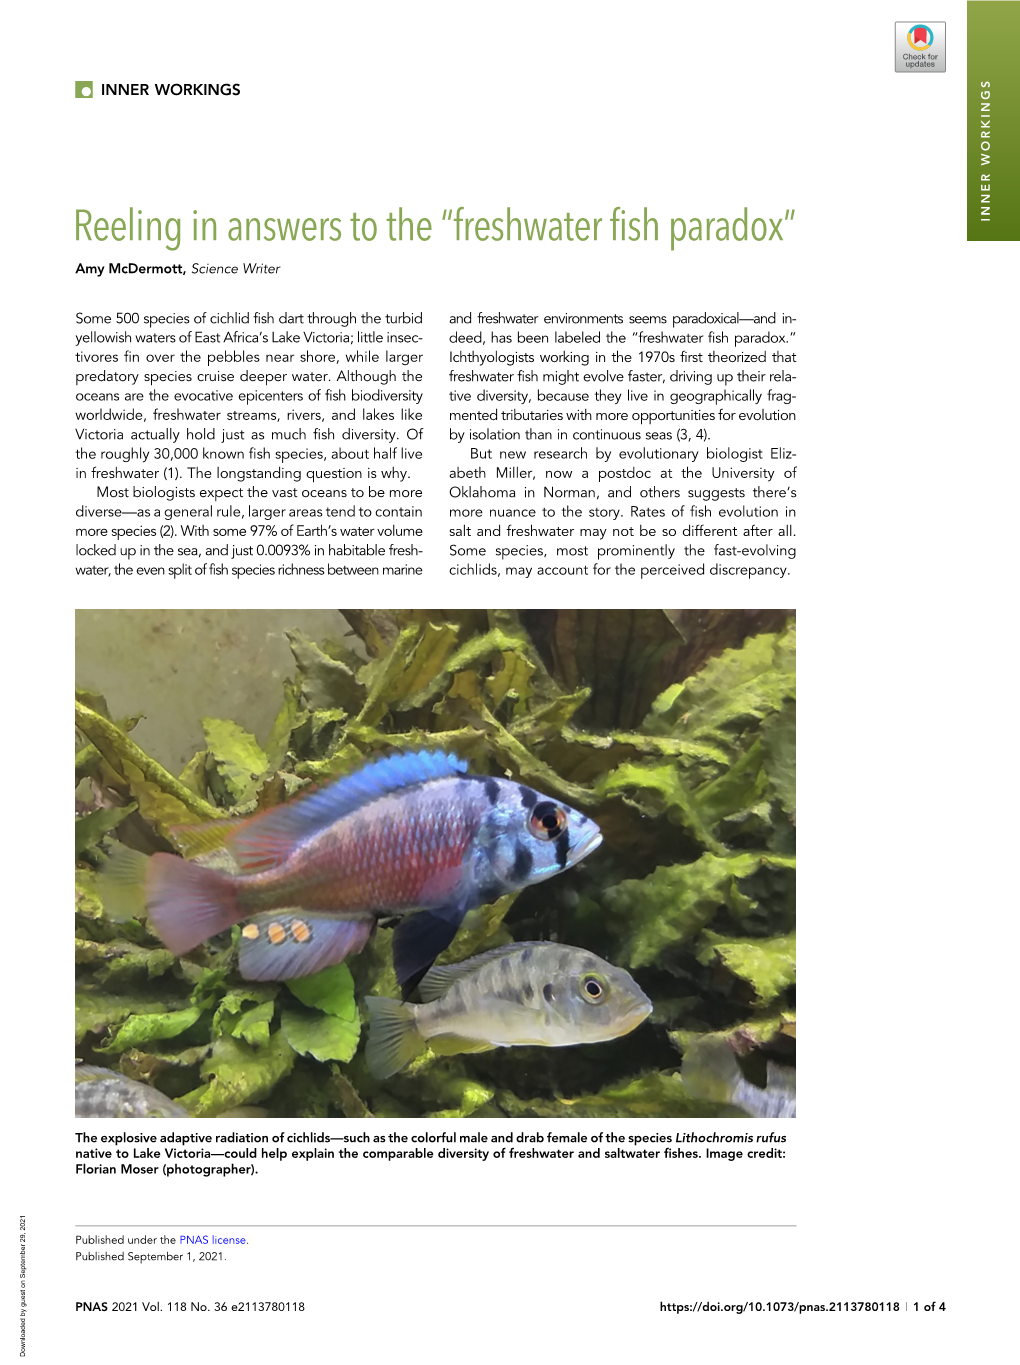 Inner Workings: Reeling in Answers to the “Freshwater Fish Paradox”